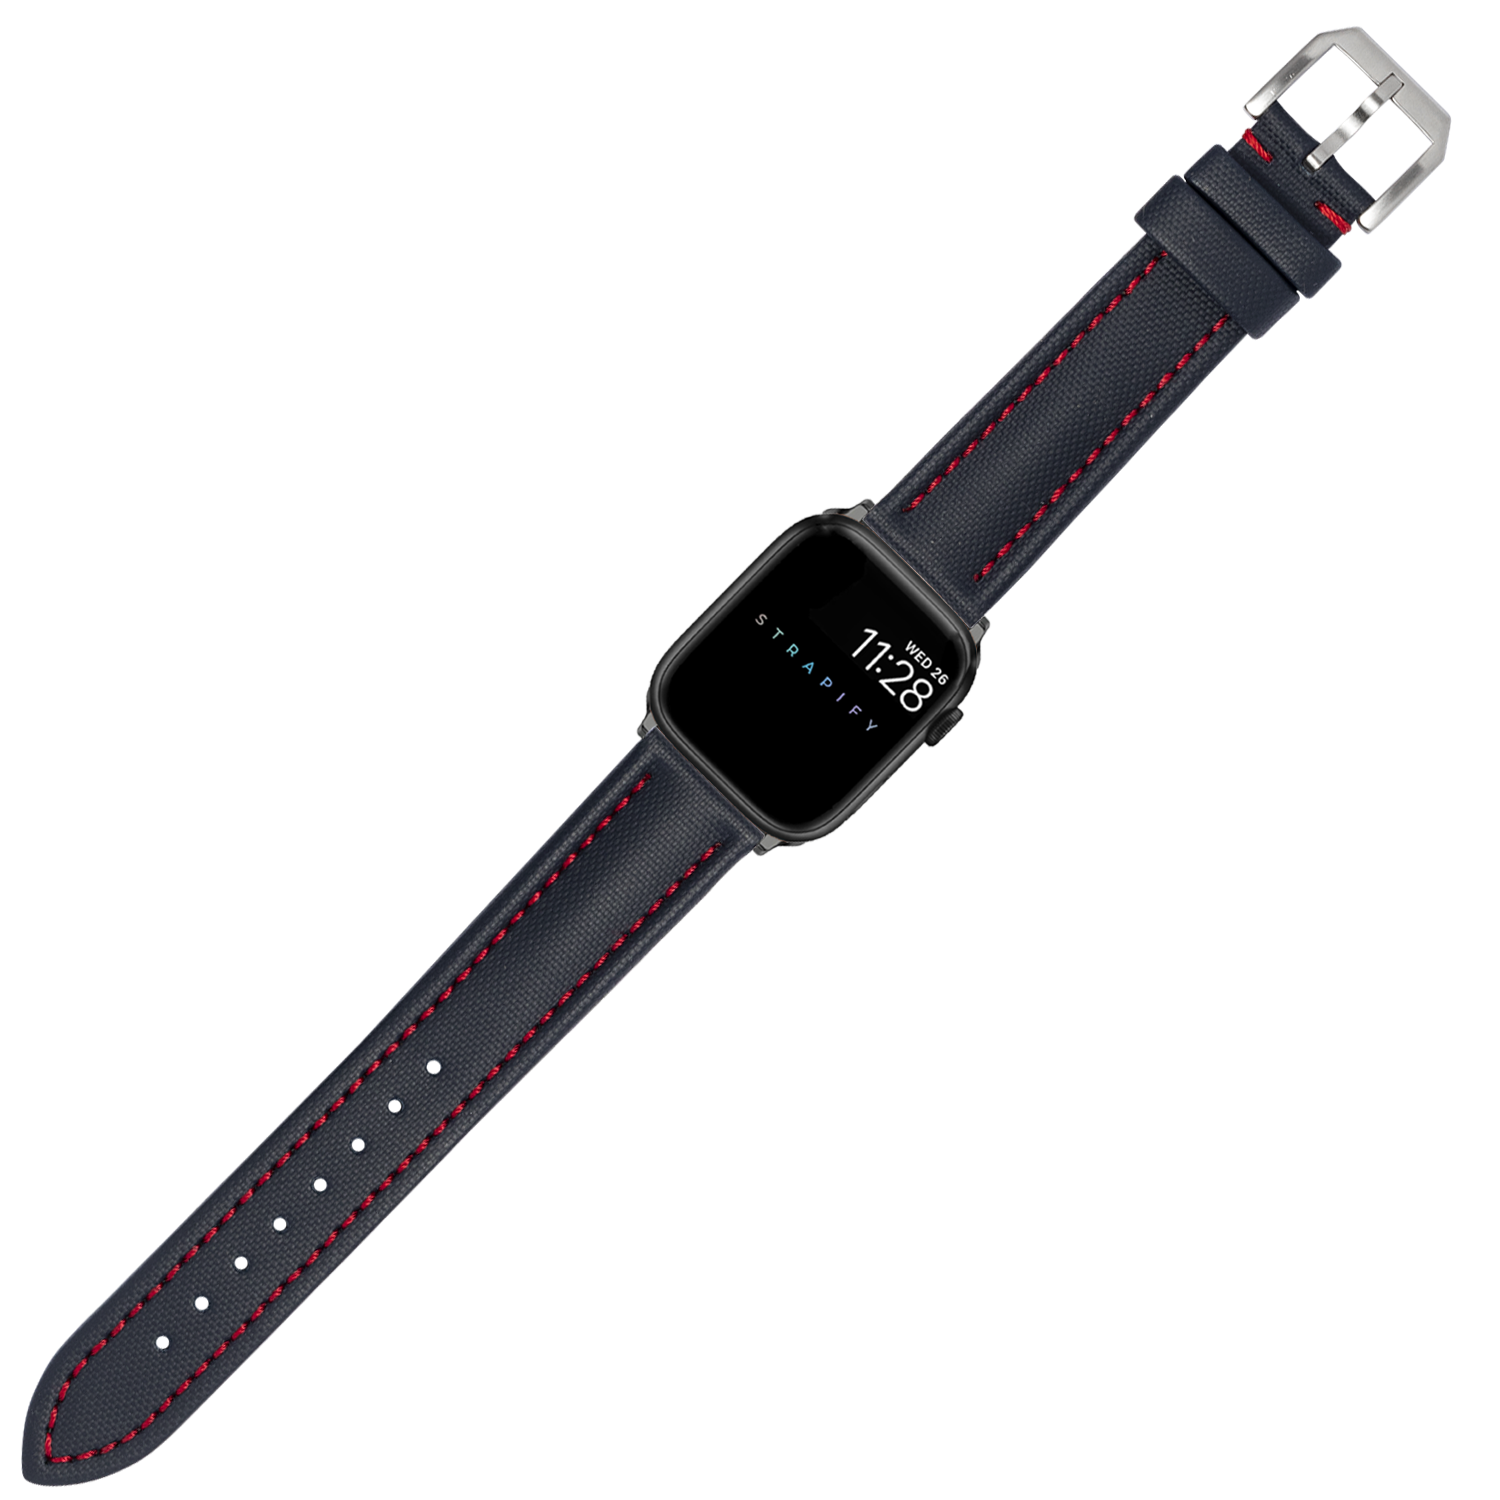 [Apple Watch] King Sailcloth - Navy Blue with Red Stitching